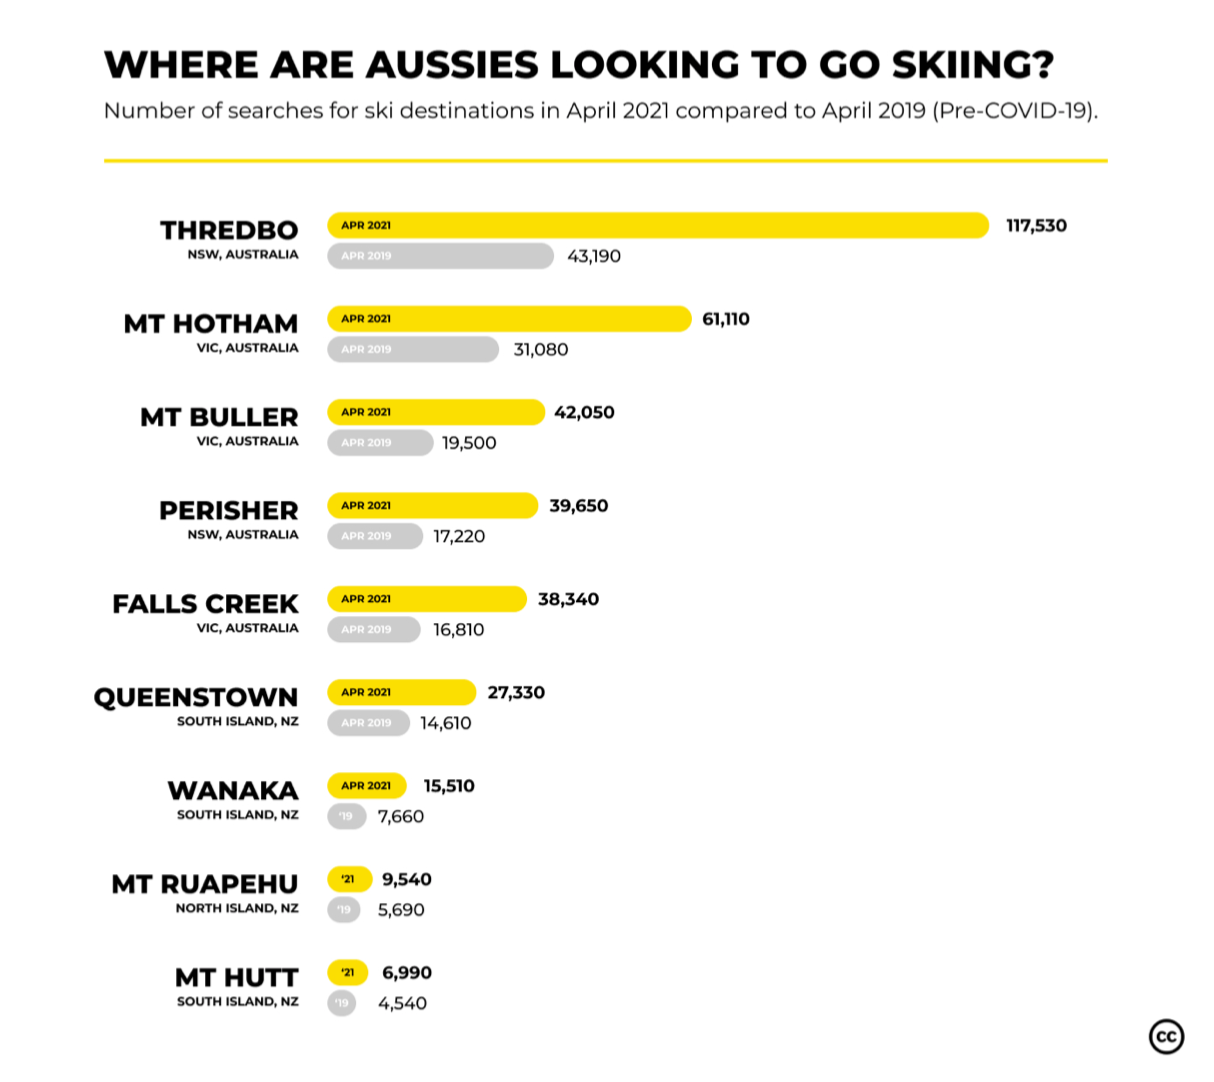 Aussies Looking to go skiing